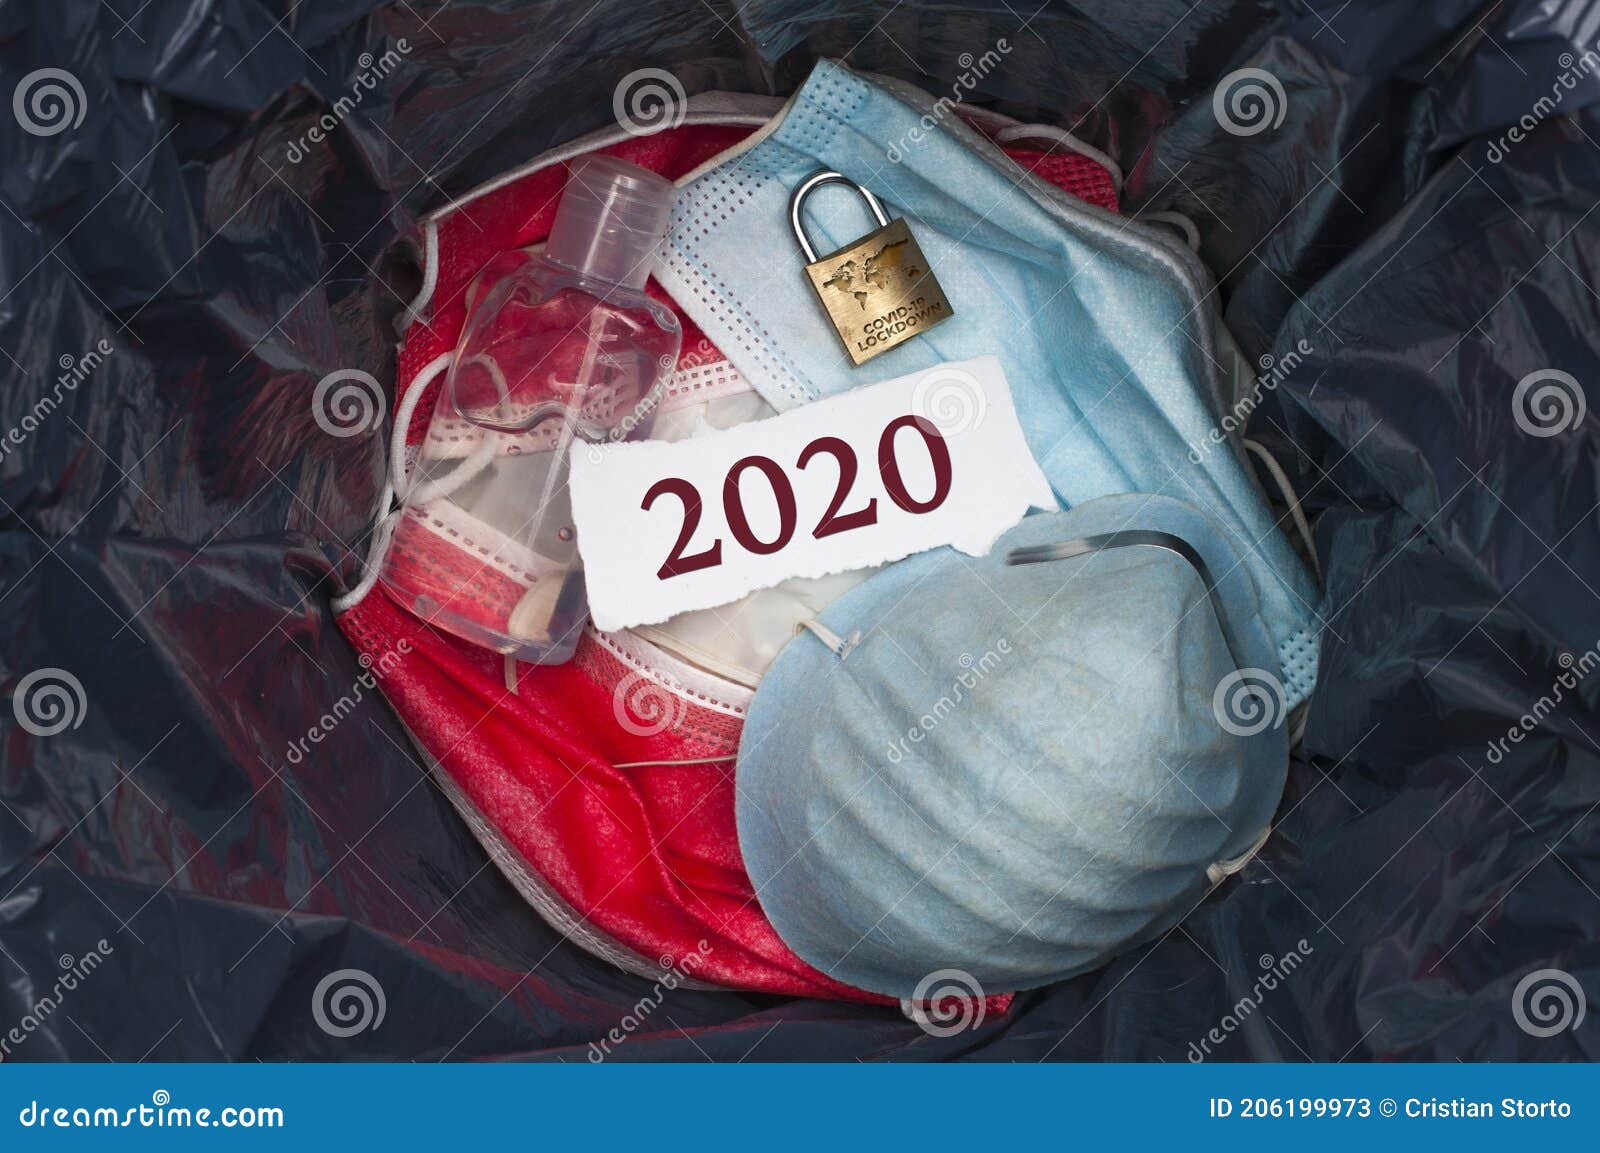 goodbye 2020 concept: the inside of a trashbin with surgical masks, sanitizing gel, a padlock and a slip of paper with the